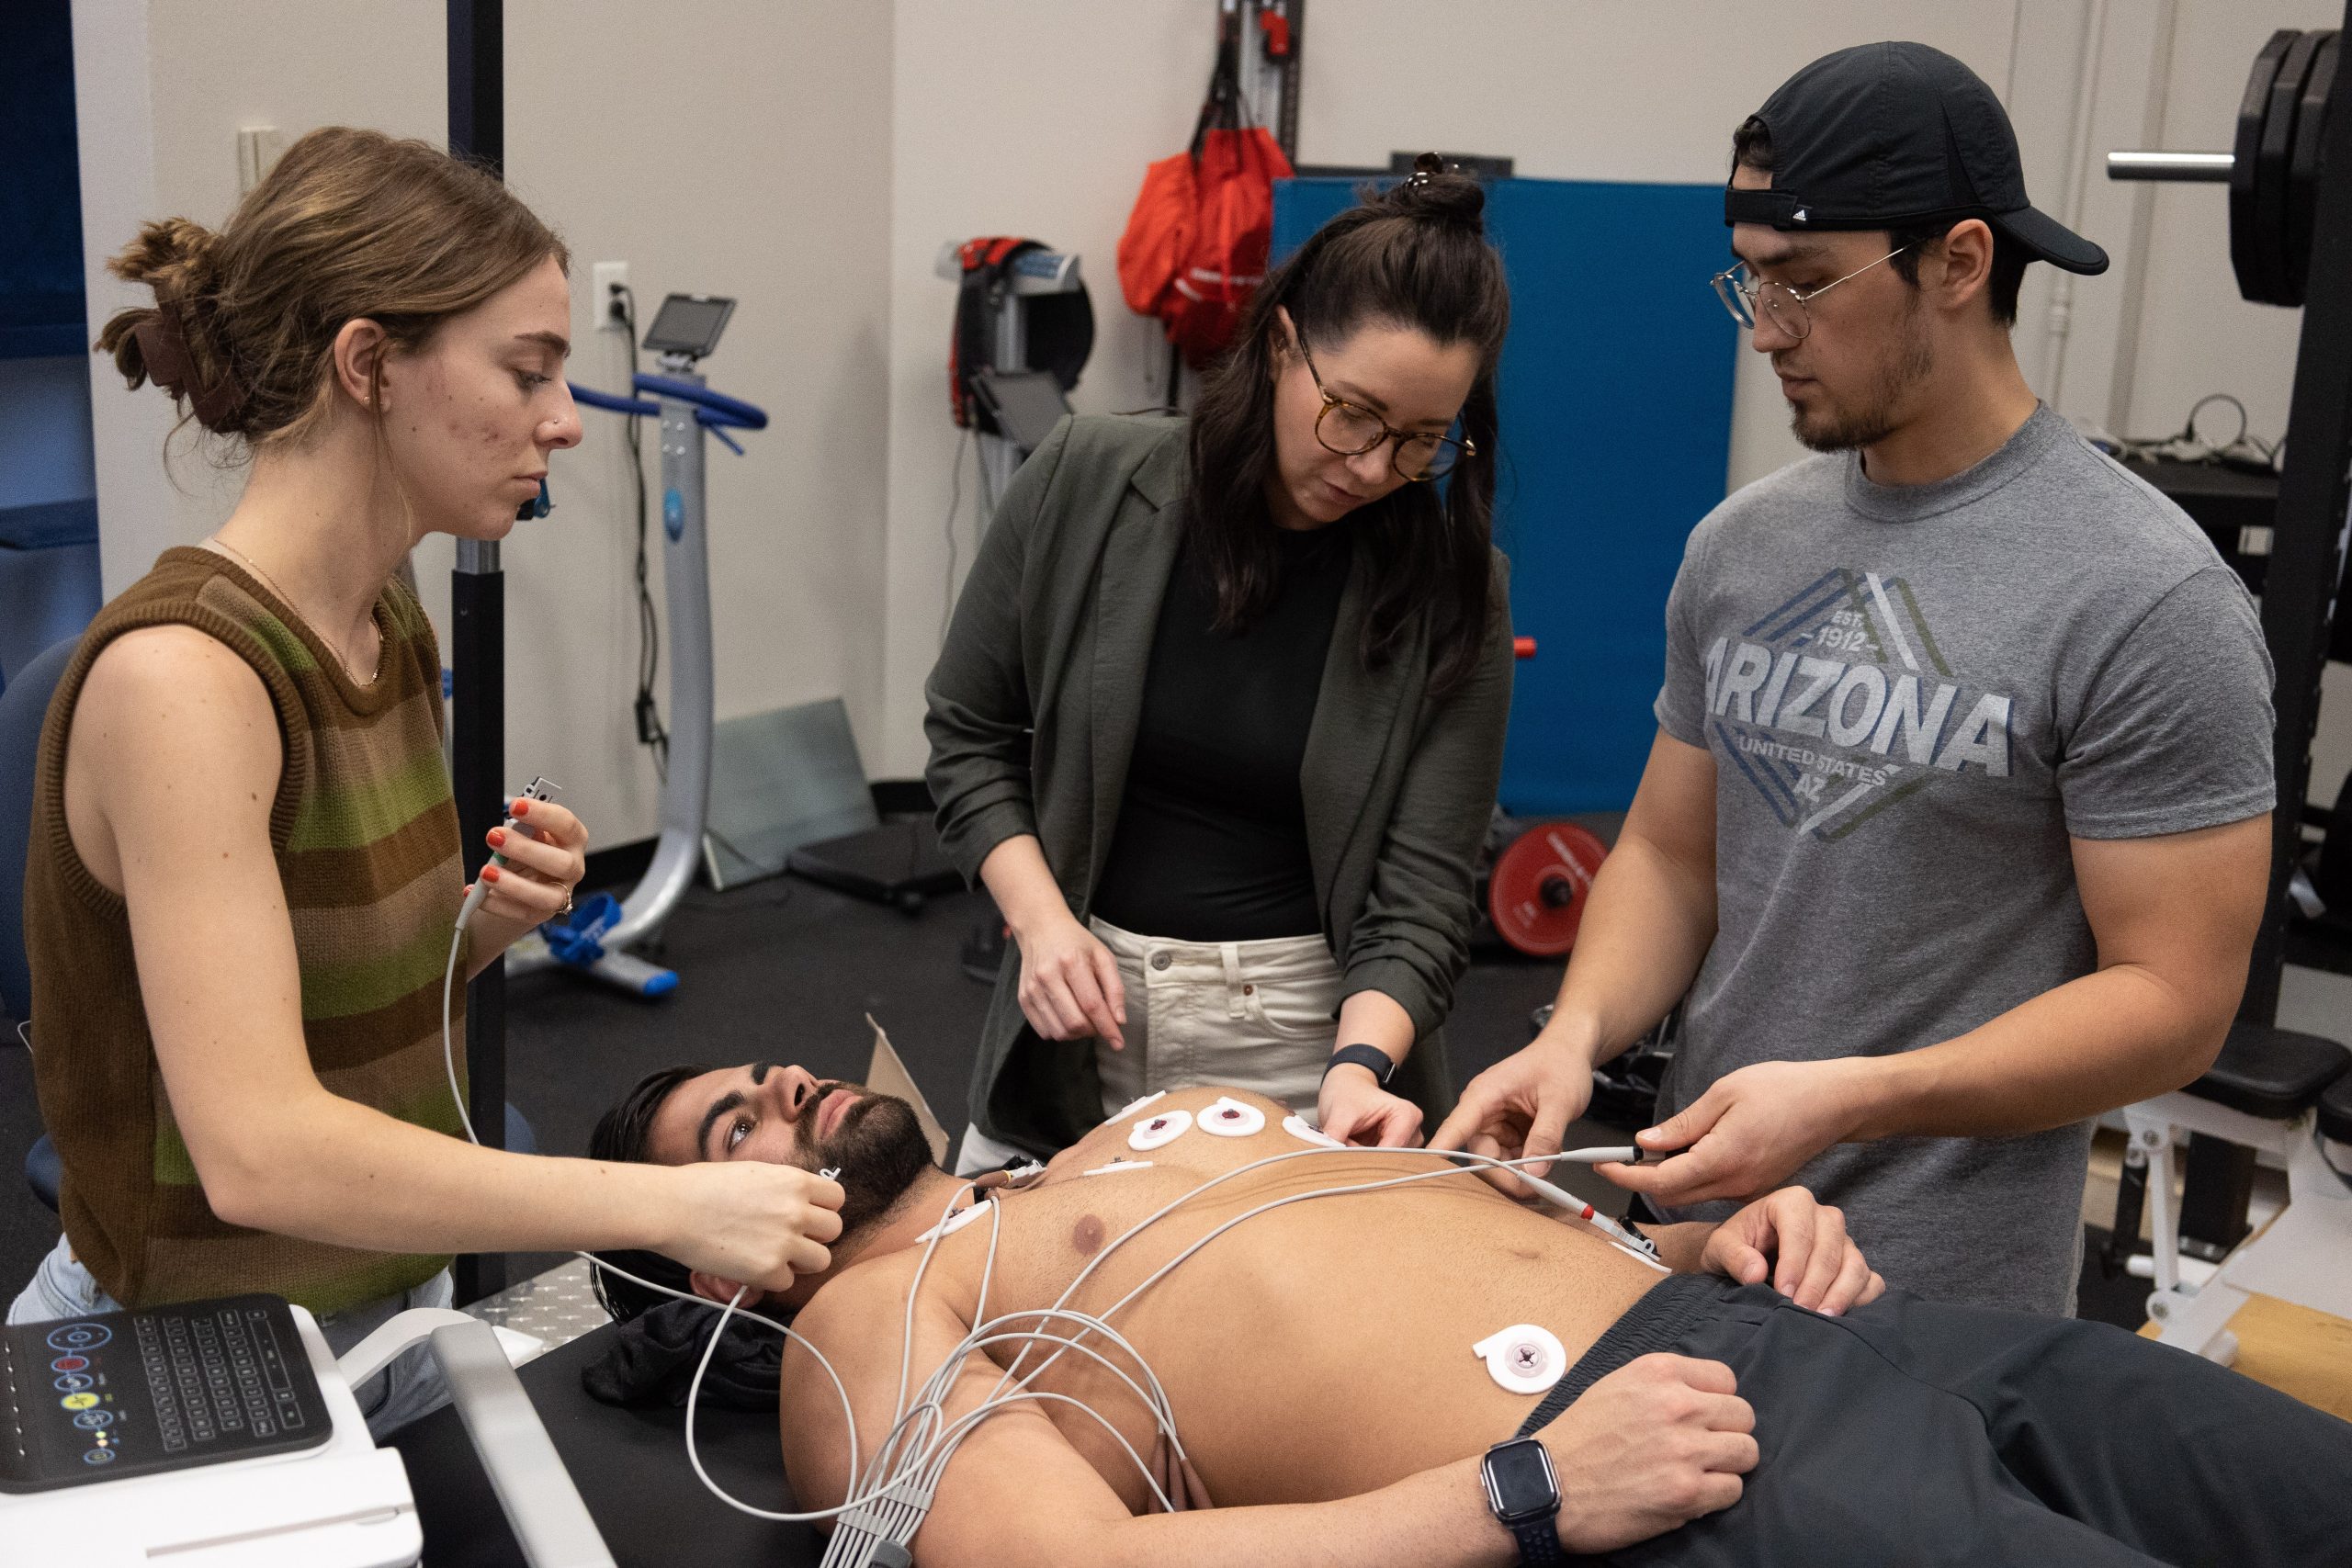 Graduate students in Fretti’s class on exercise cardiovascular physiology practice resting 12-lead electrocardiography assessments.